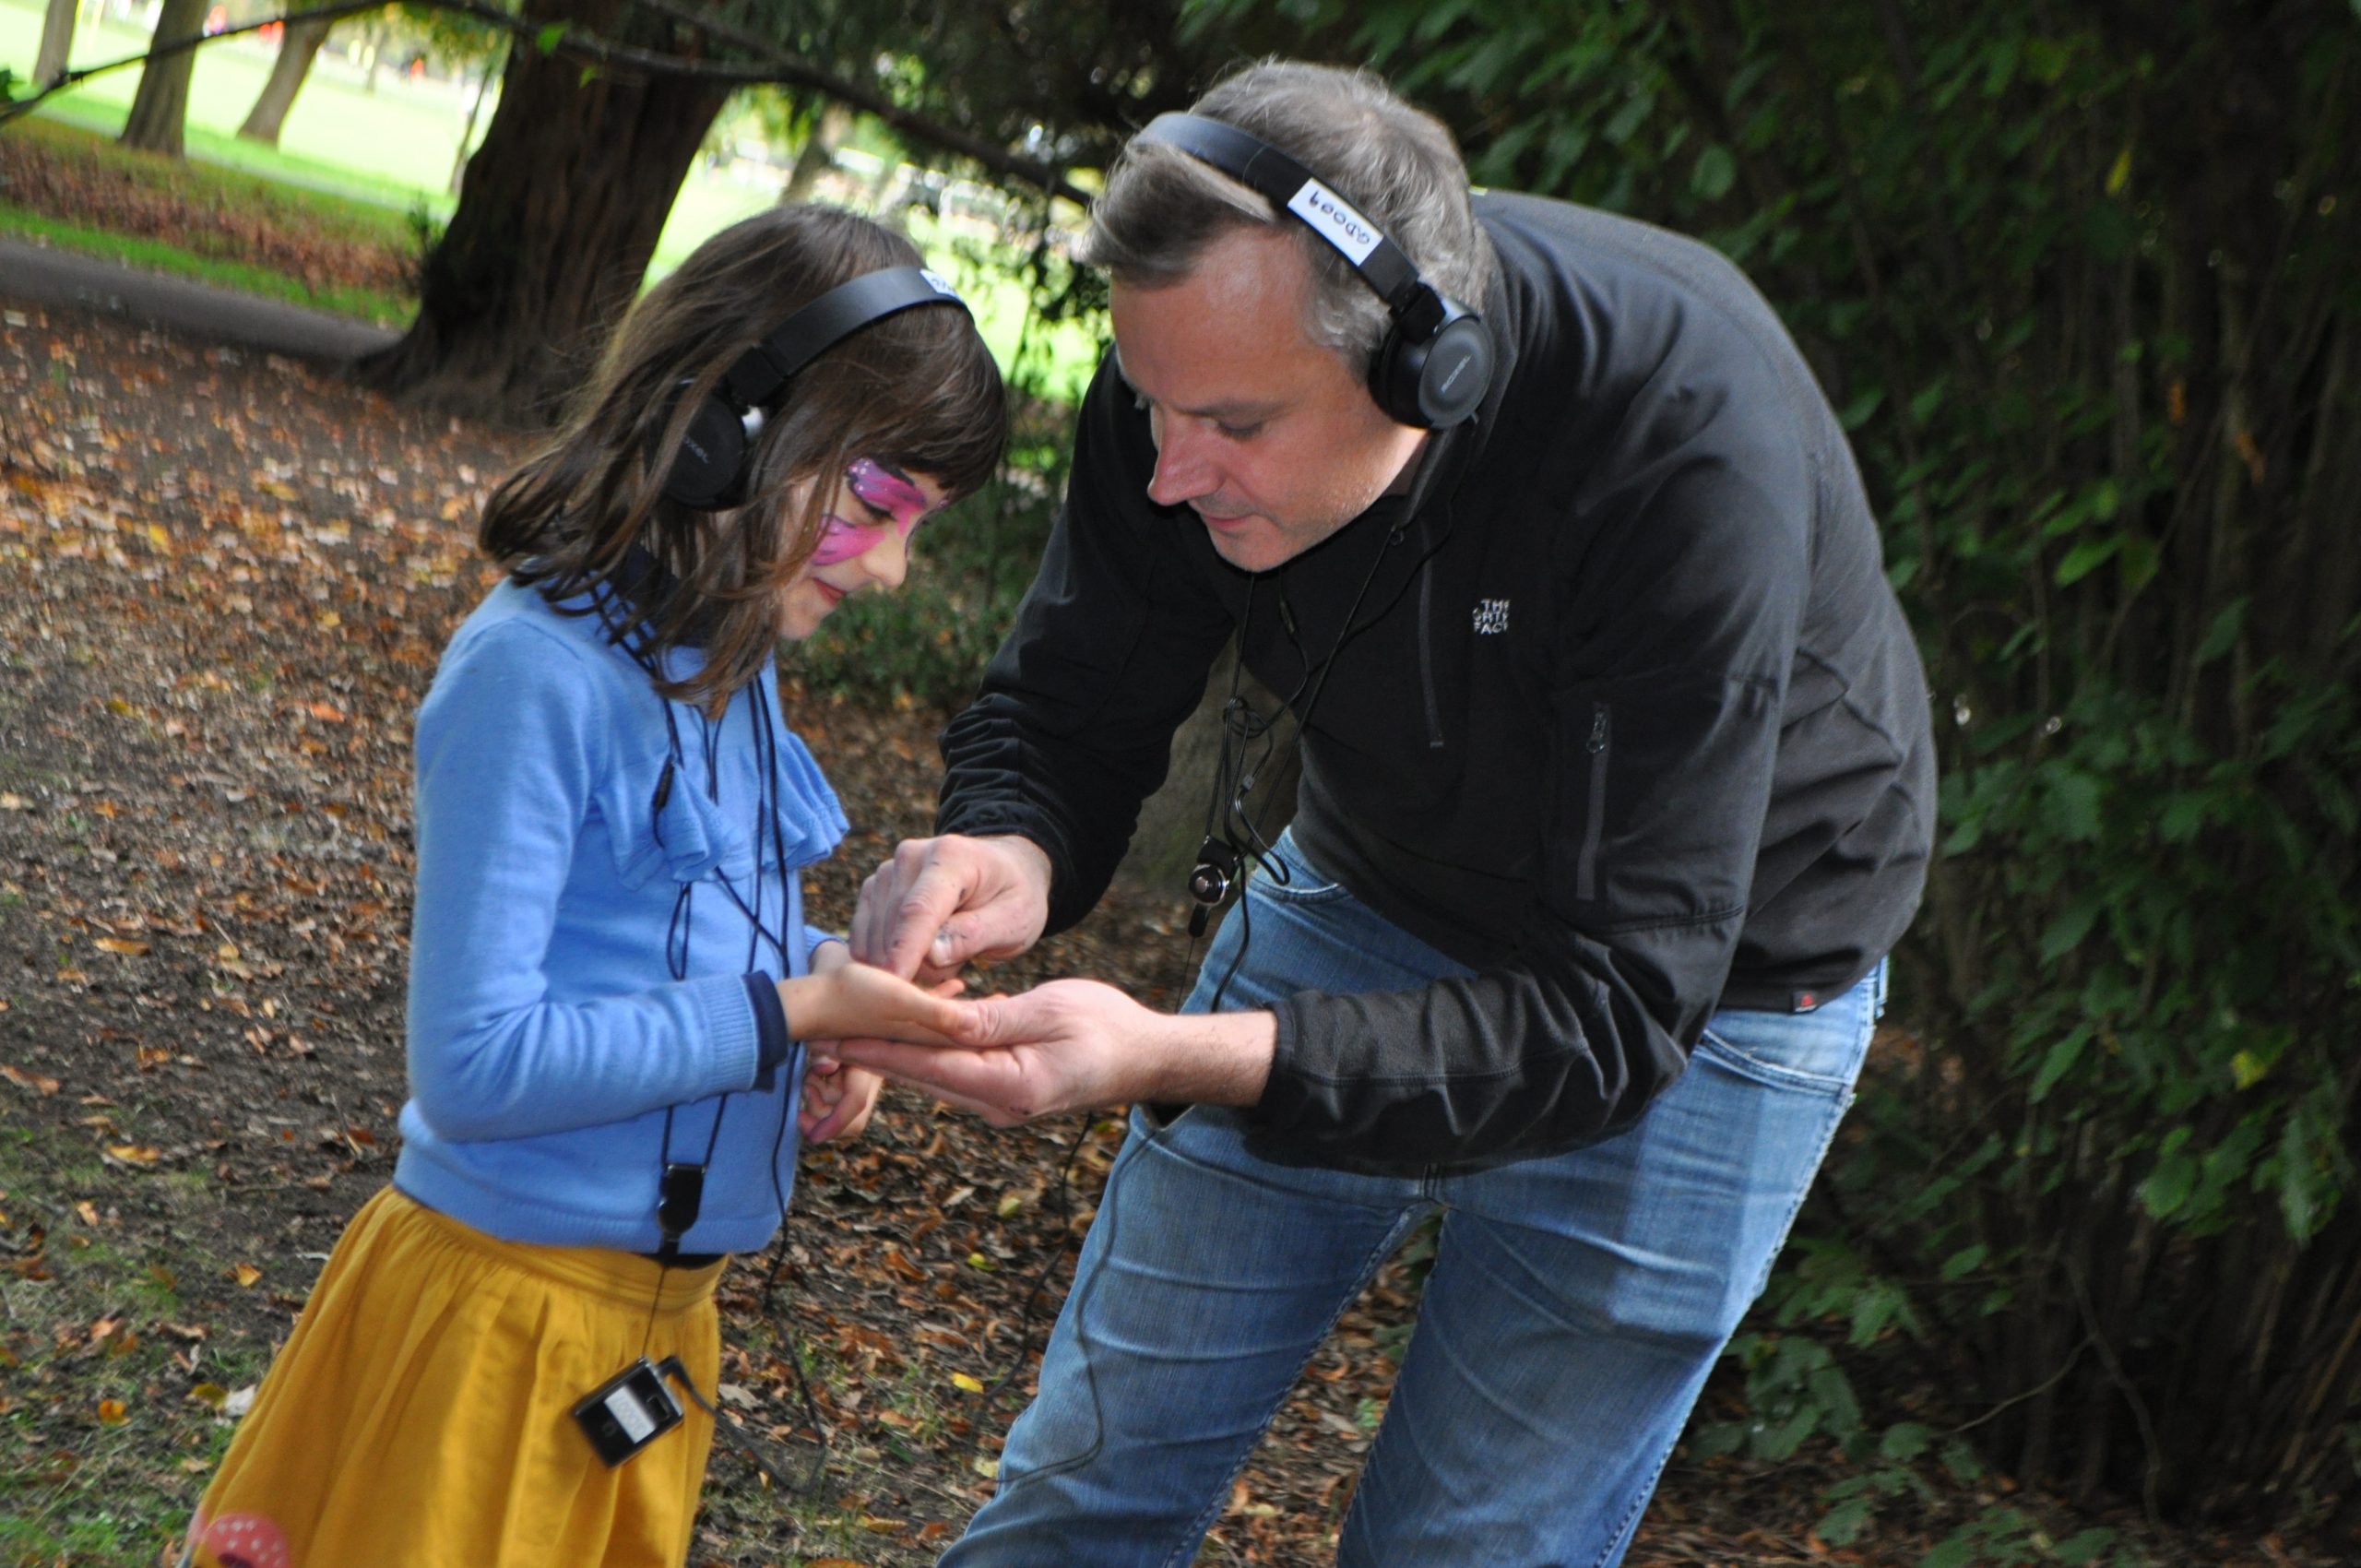 MidSummerland. A child and an adult wear headphones and prepare to press play at the same time